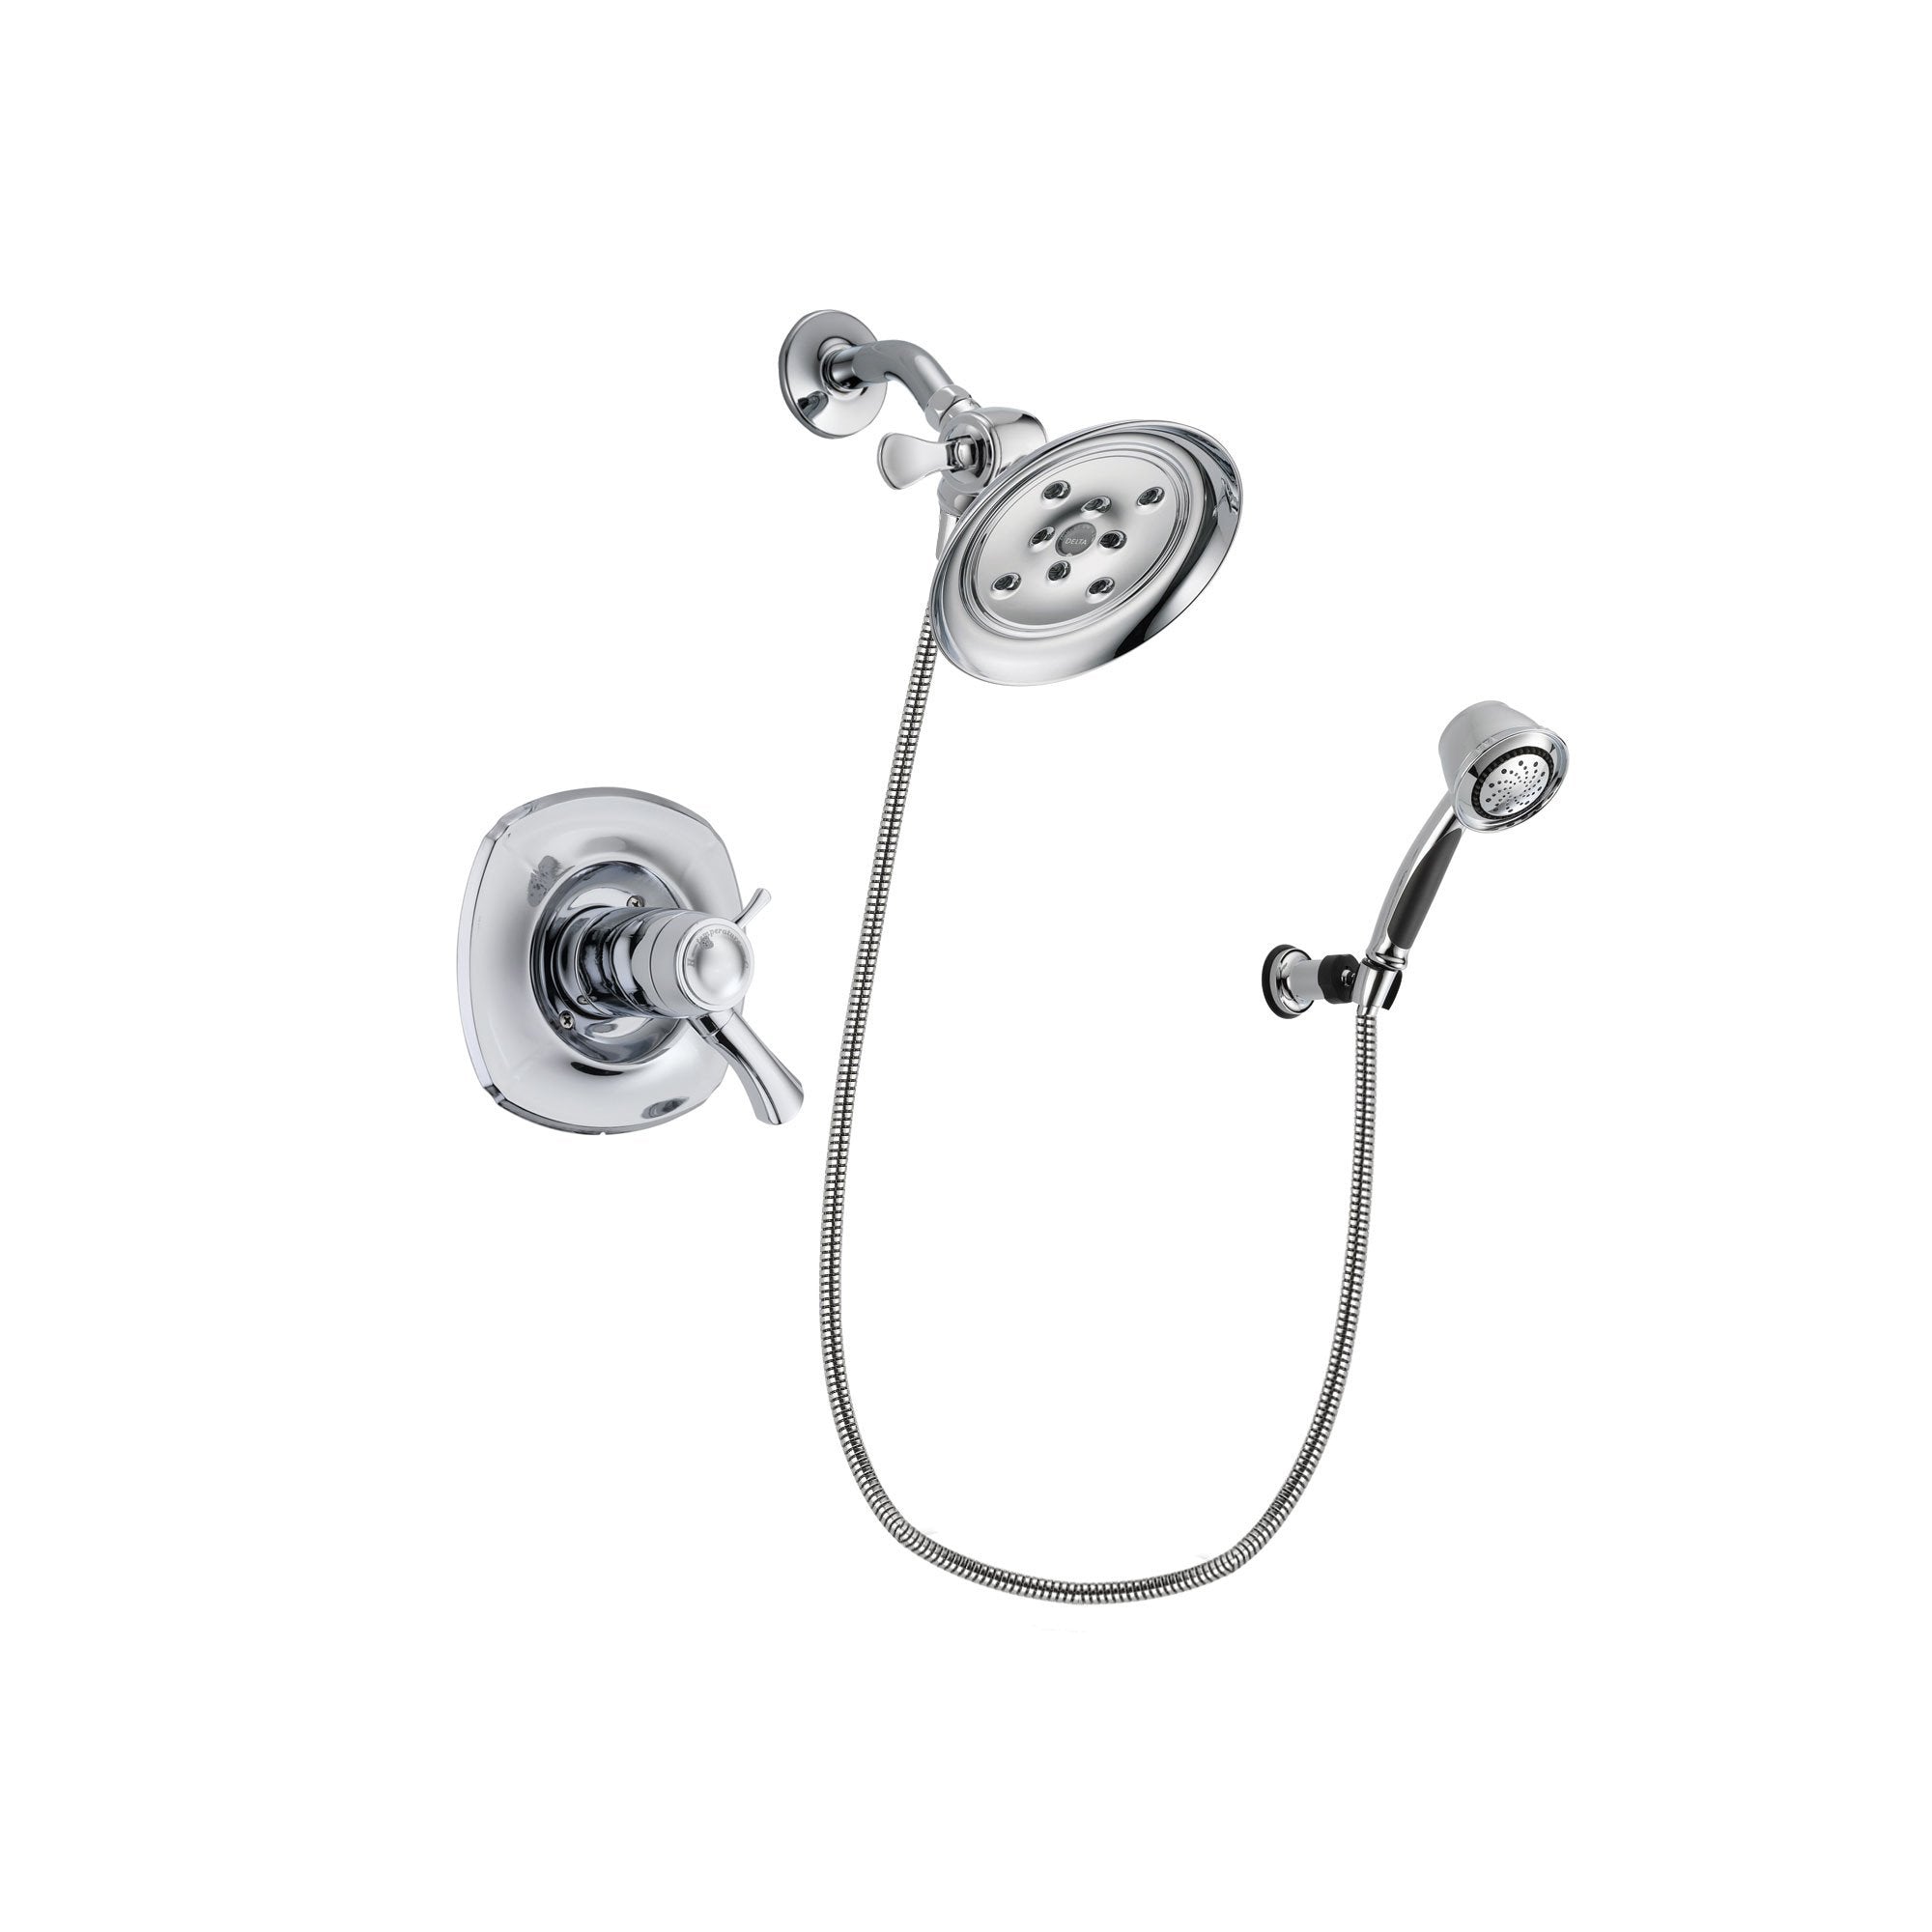 Delta Addison Chrome Finish Thermostatic Shower Faucet System Package with Large Rain Showerhead and 5-Spray Adjustable Wall Mount Hand Shower Includes Rough-in Valve DSP0364V